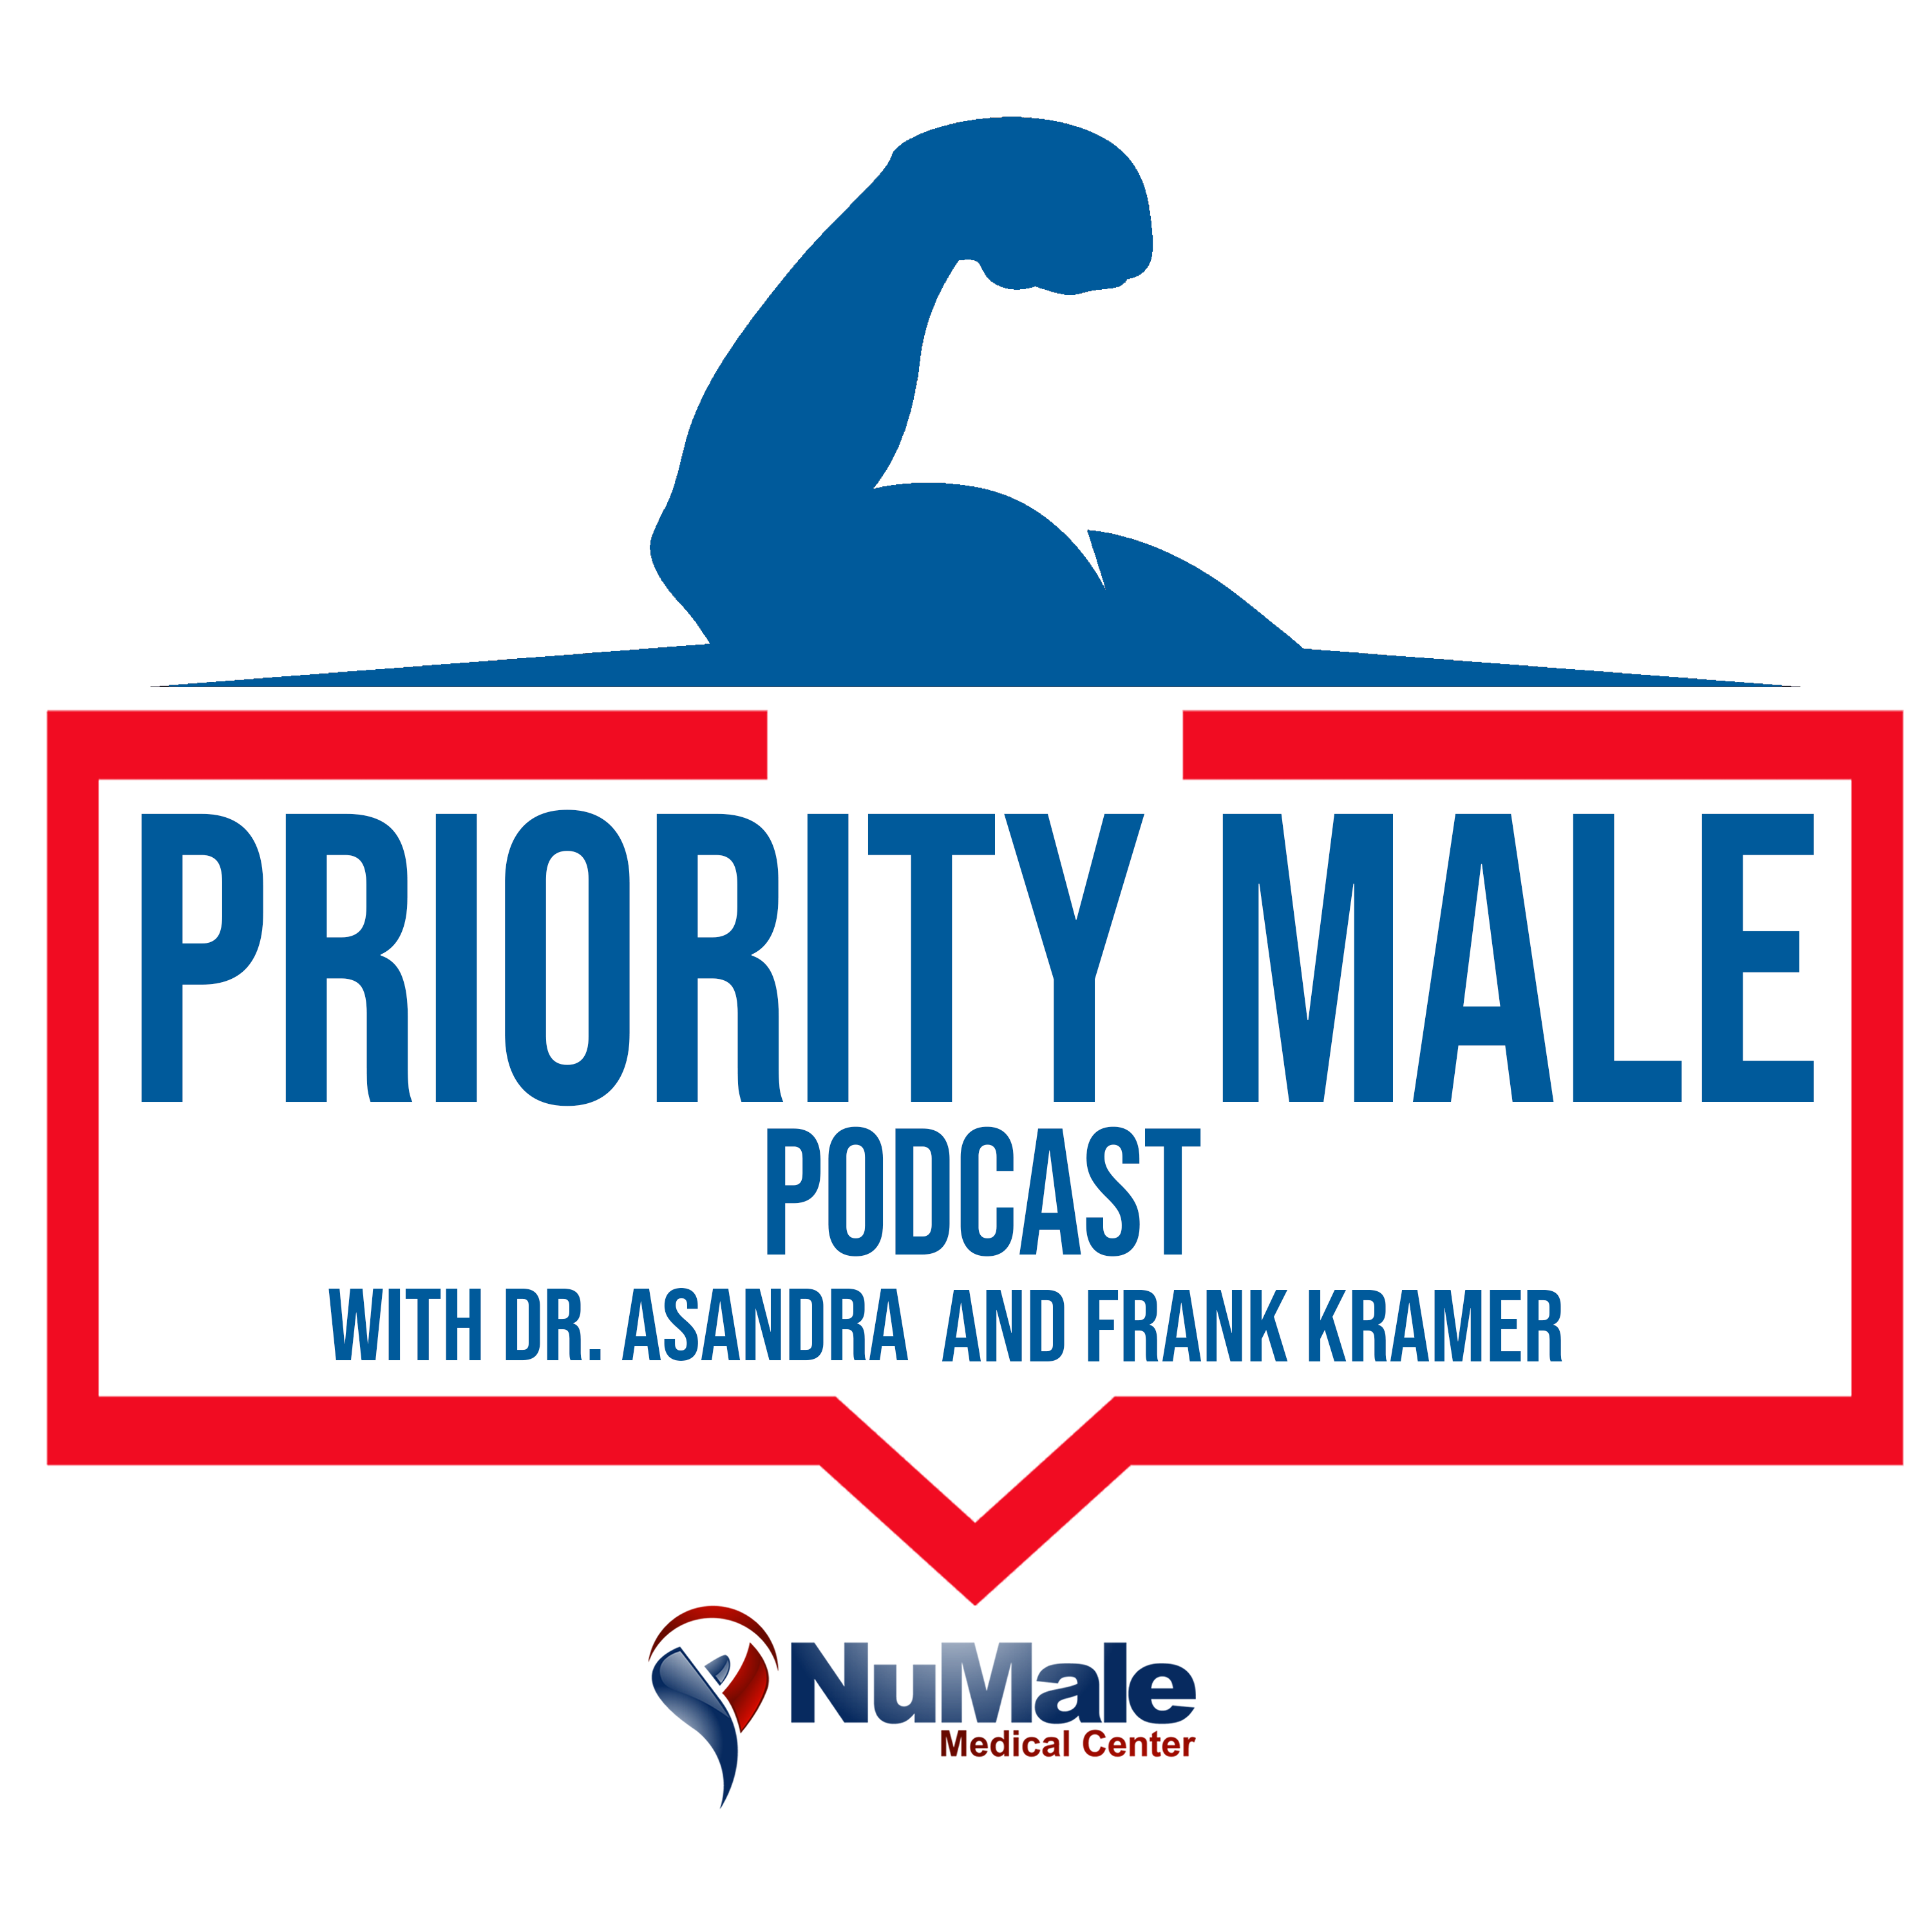 Priority Male brought to you by NuMale Medical Center